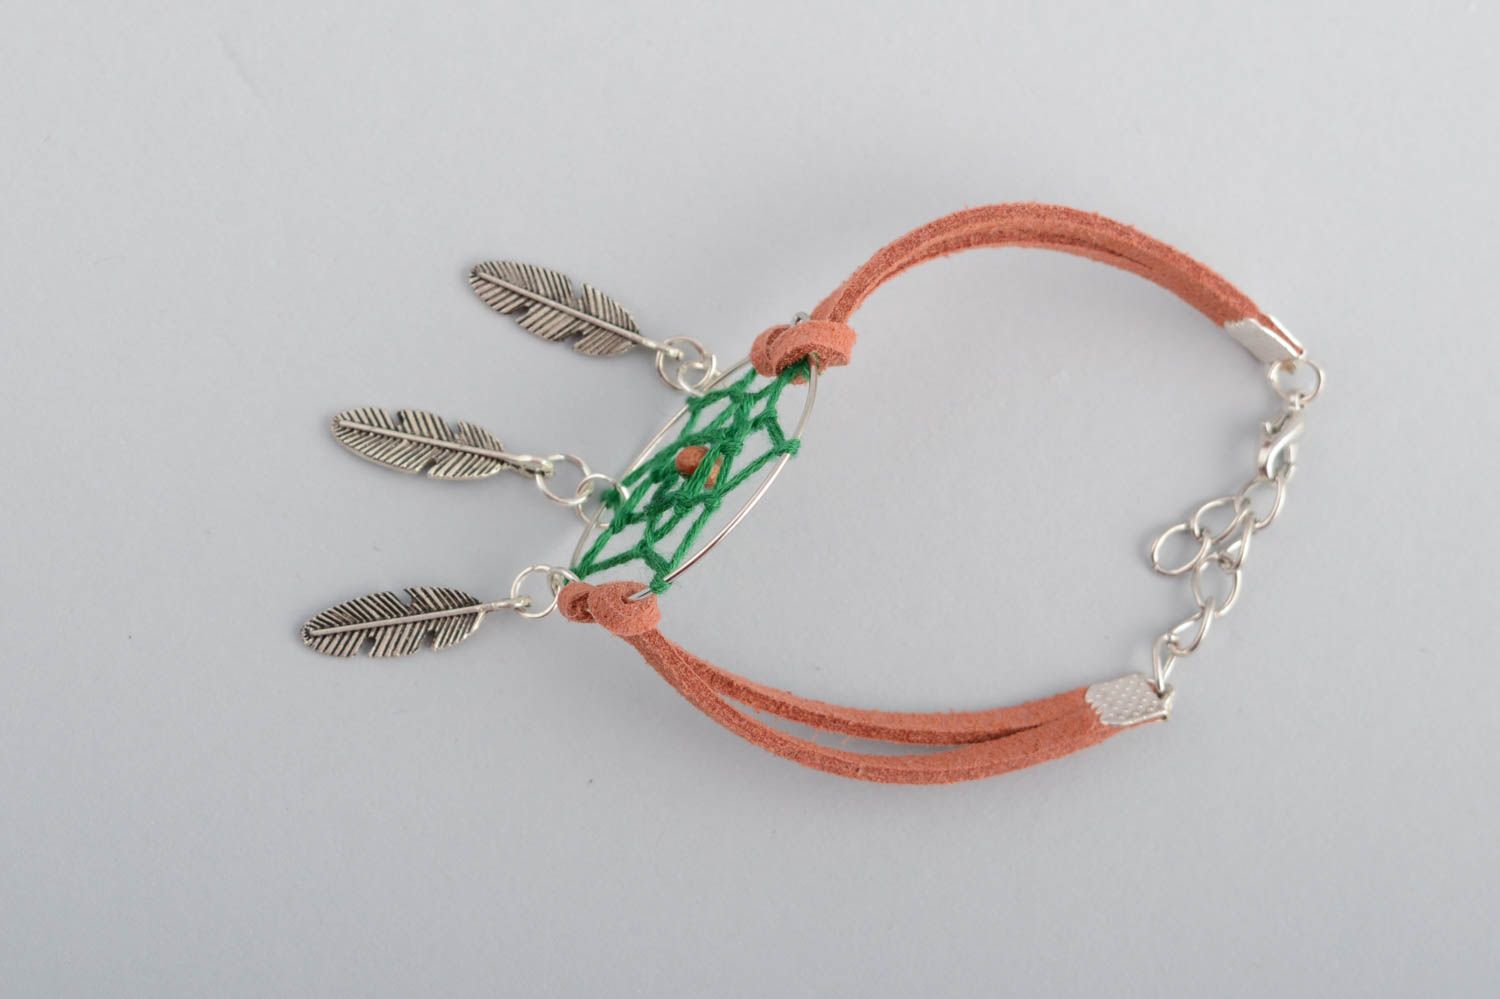 Handmade talisman bracelet with charms in shape of feathers Dreamcatcher photo 4